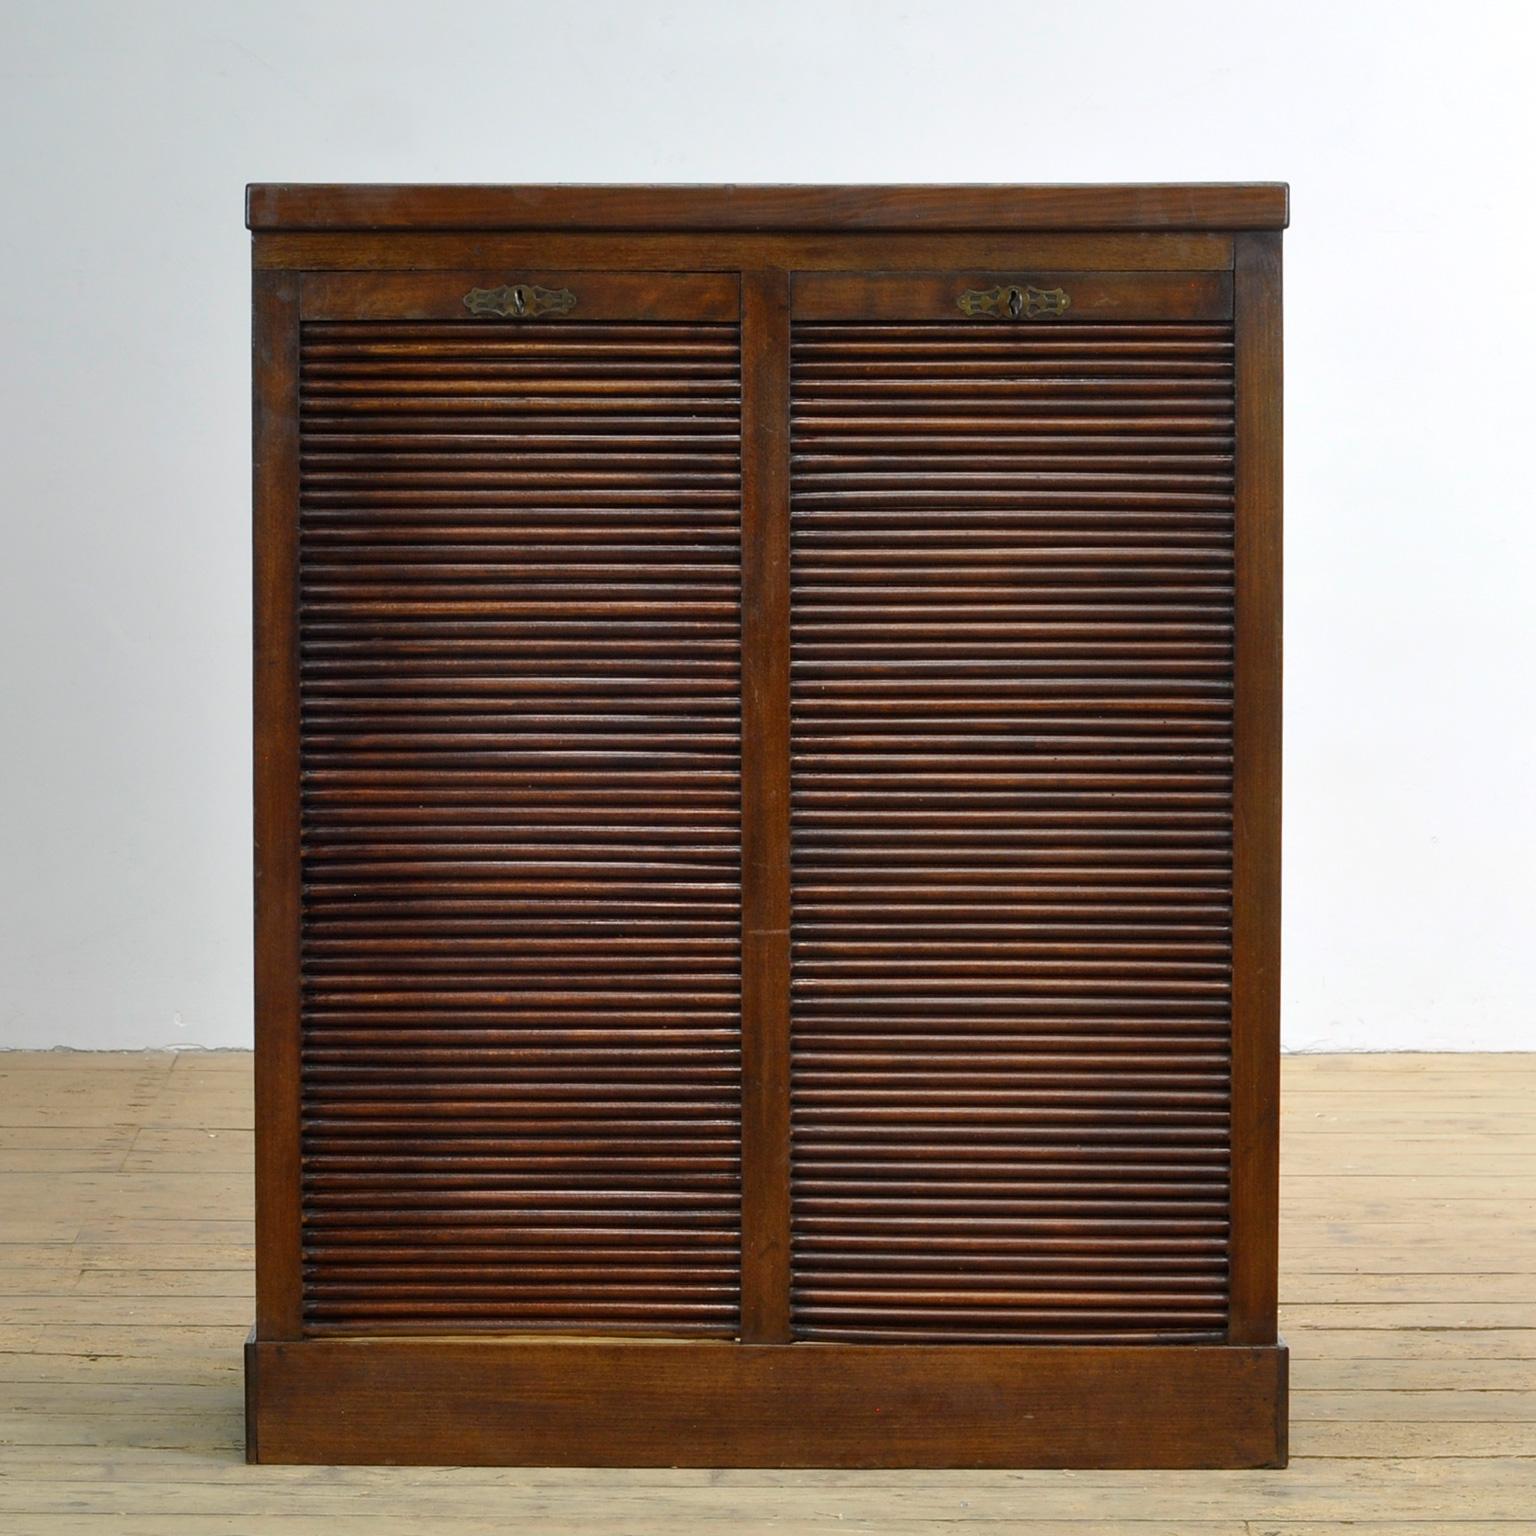 This wooden roller door cabinet / filing cabinet was made from oak in circa 1920. With properly working locks and keys. Behind the 2 roller doors 4 adjustable shelves. Handy for paperwork, for example.